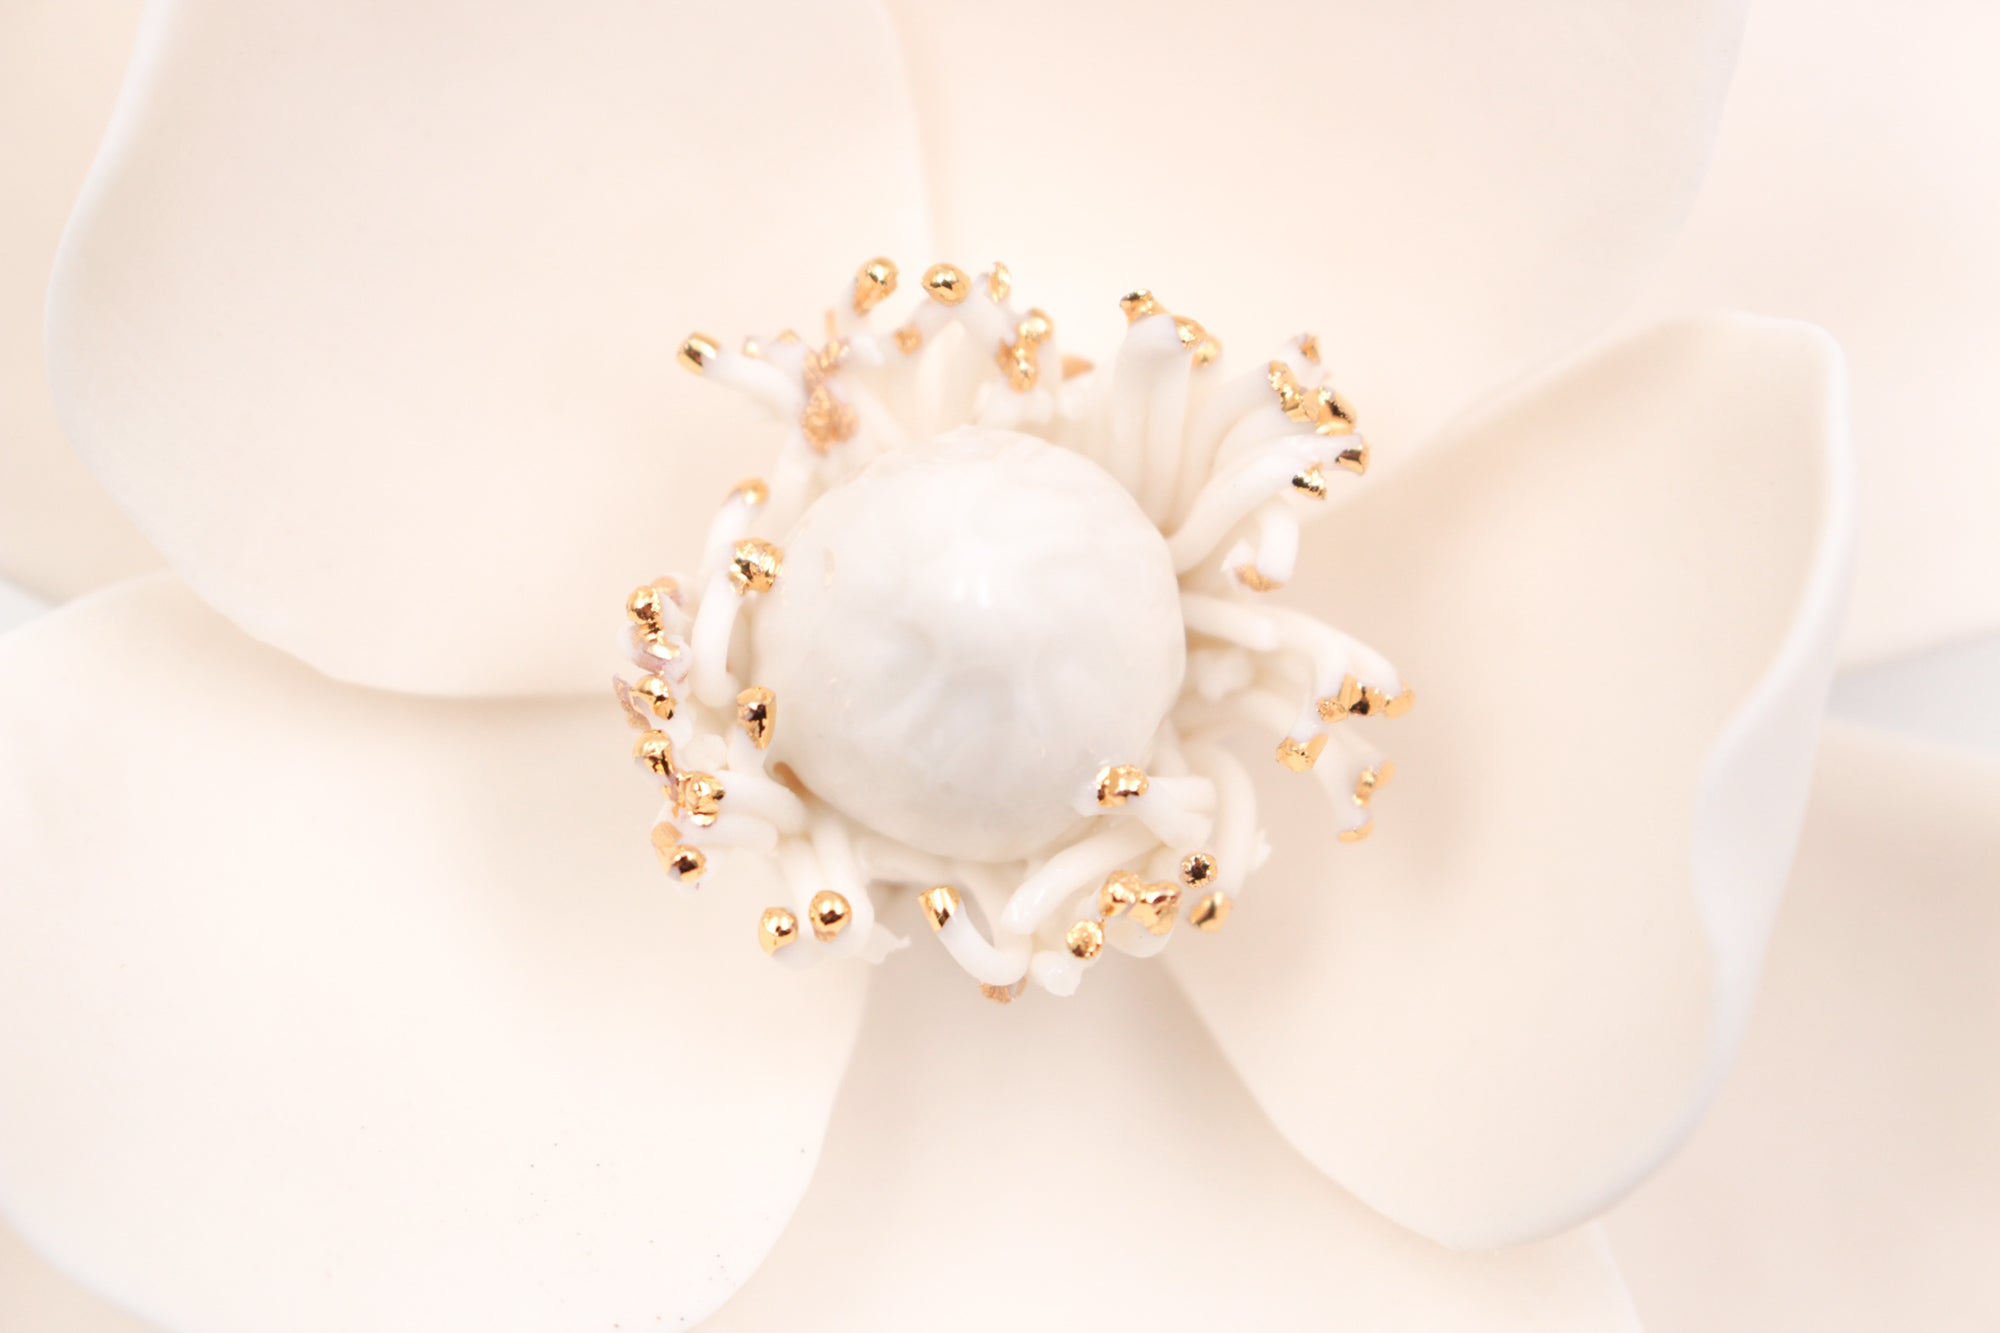 Golden Porcelain Magnolia- Handmade Porcelain Flower for Interior and Event Decoration - Made in France by Alain Granell – Home and Wall Decoration